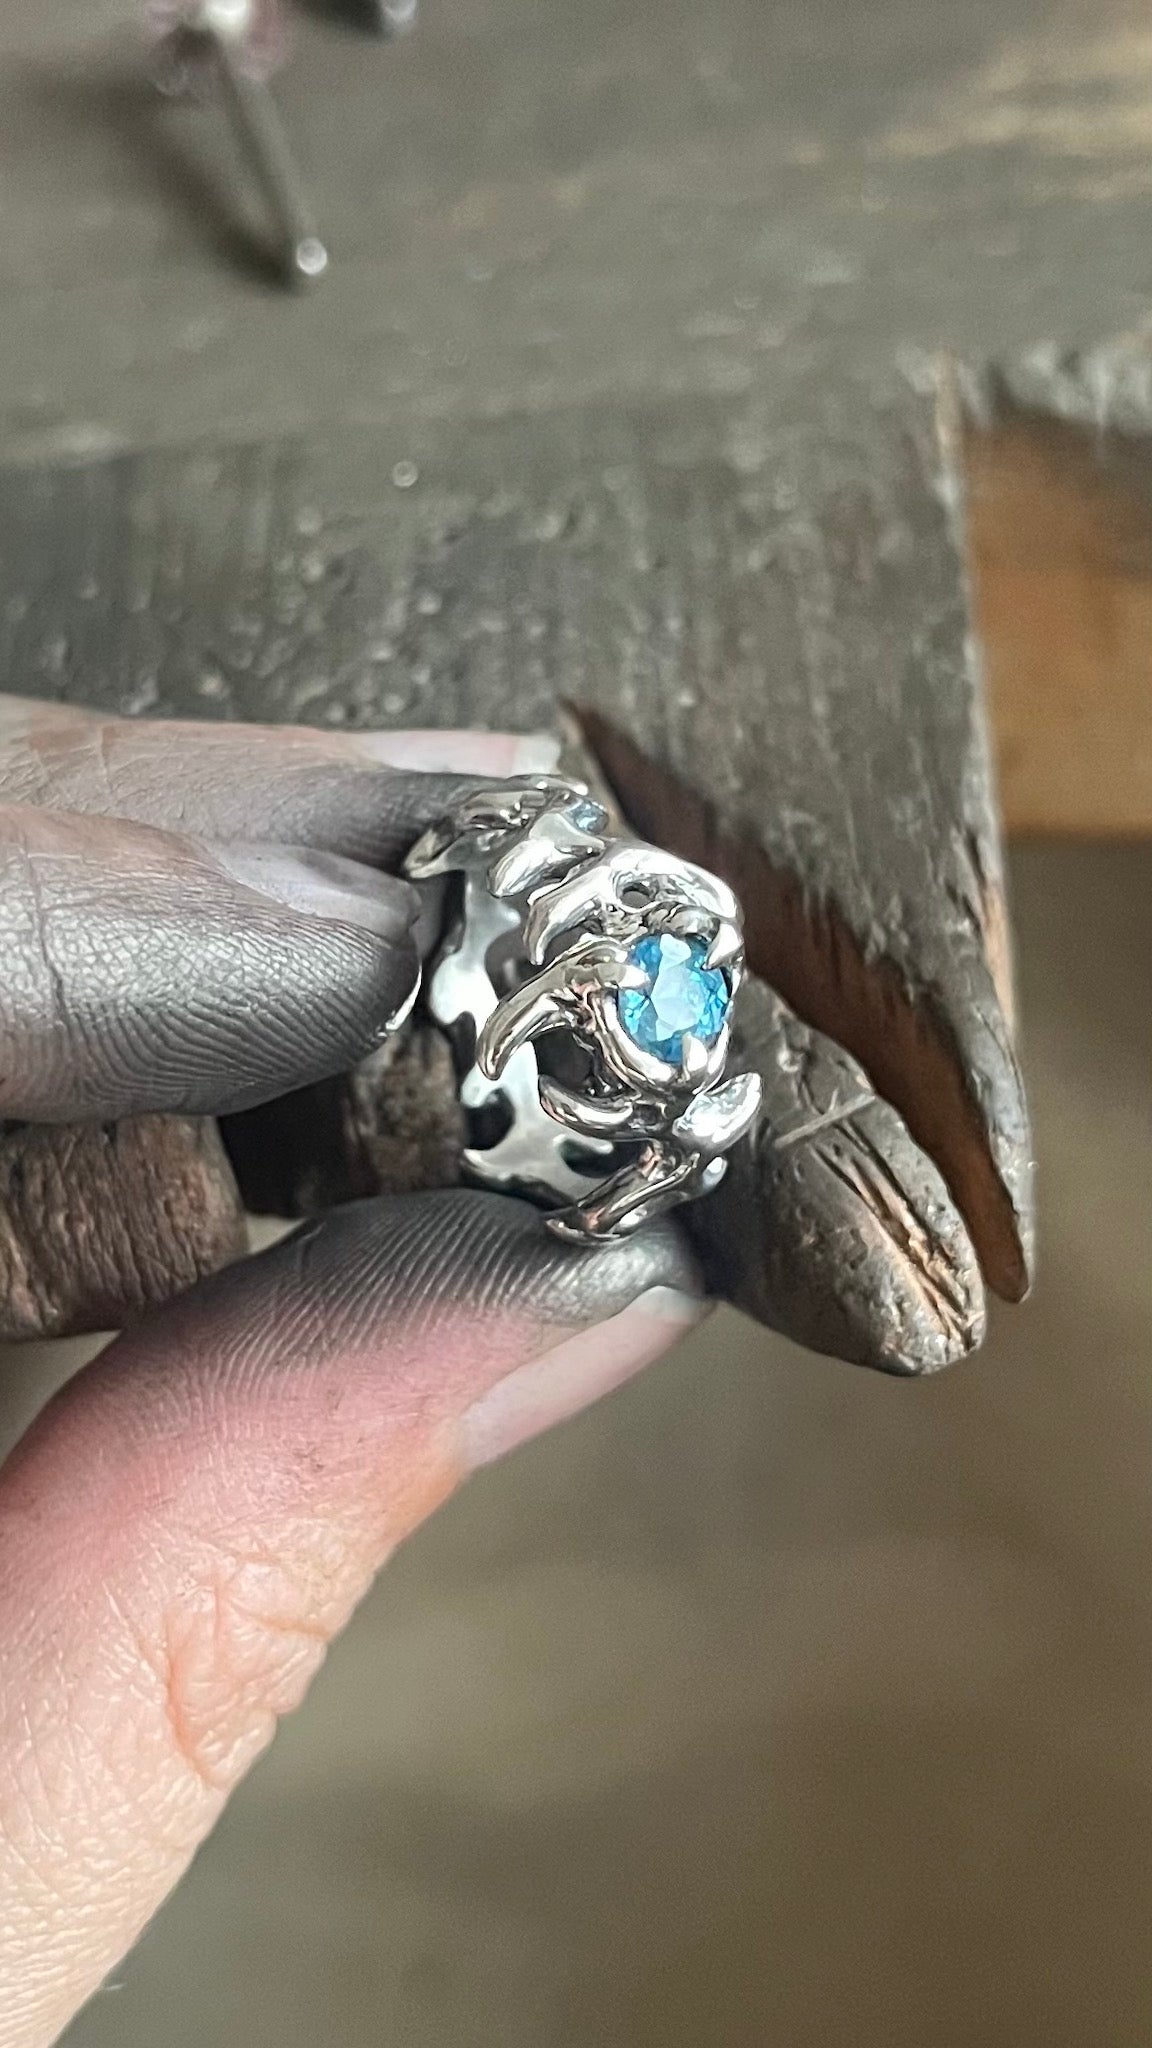 Mini KHAOS sterling silver and Swiss Blue Topaz ring XIII